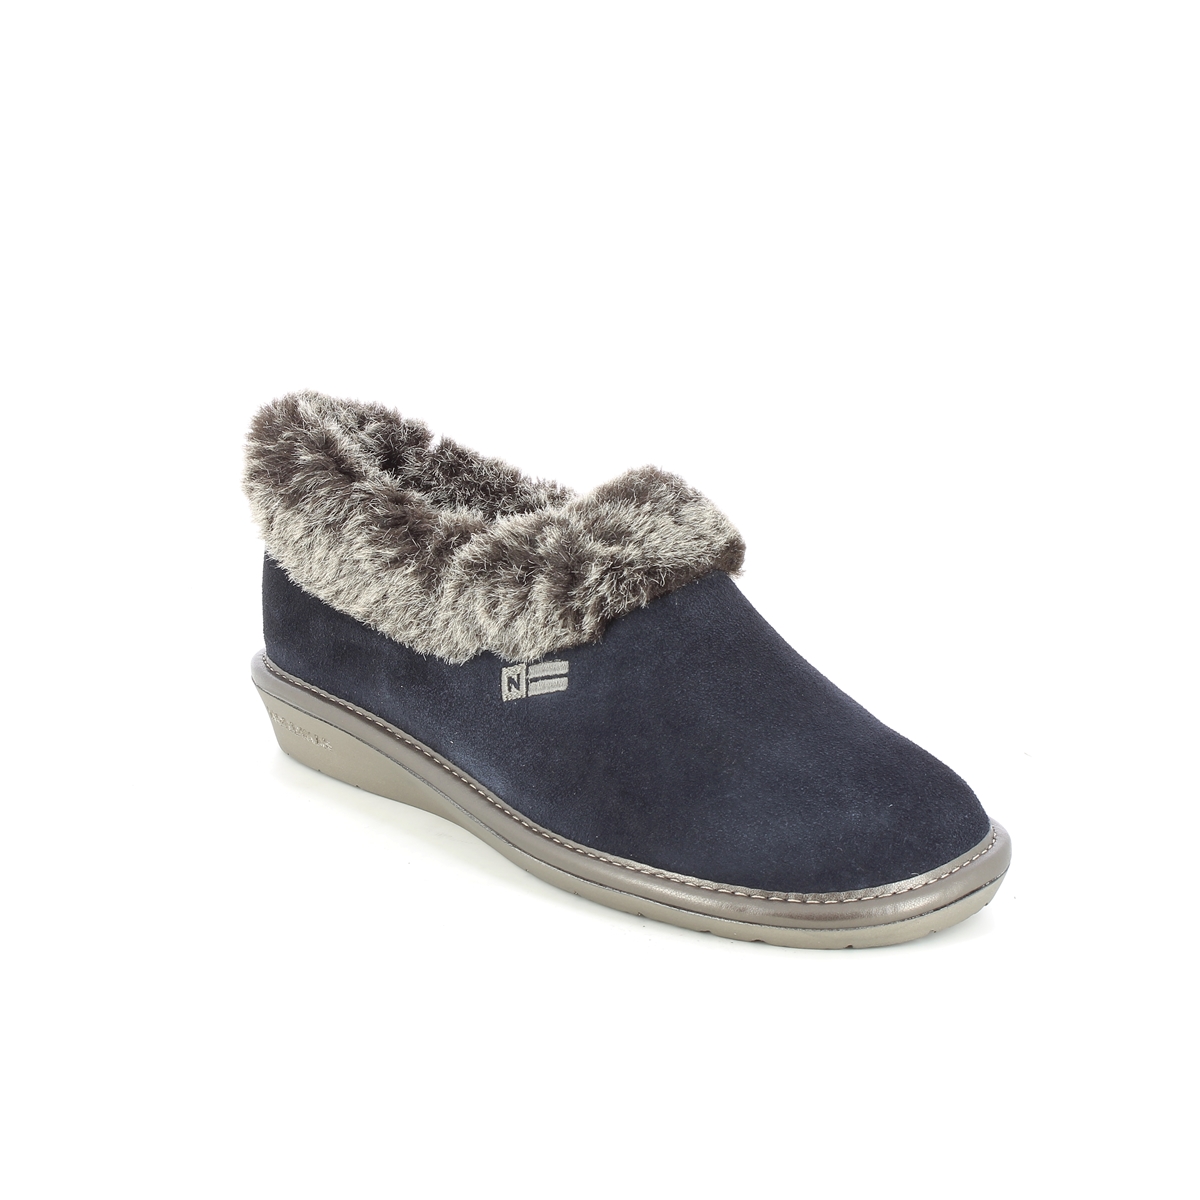 Nordikas Toasty Fur Navy Suede Womens Slippers 1358-4O In Size 39 In Plain Navy Suede